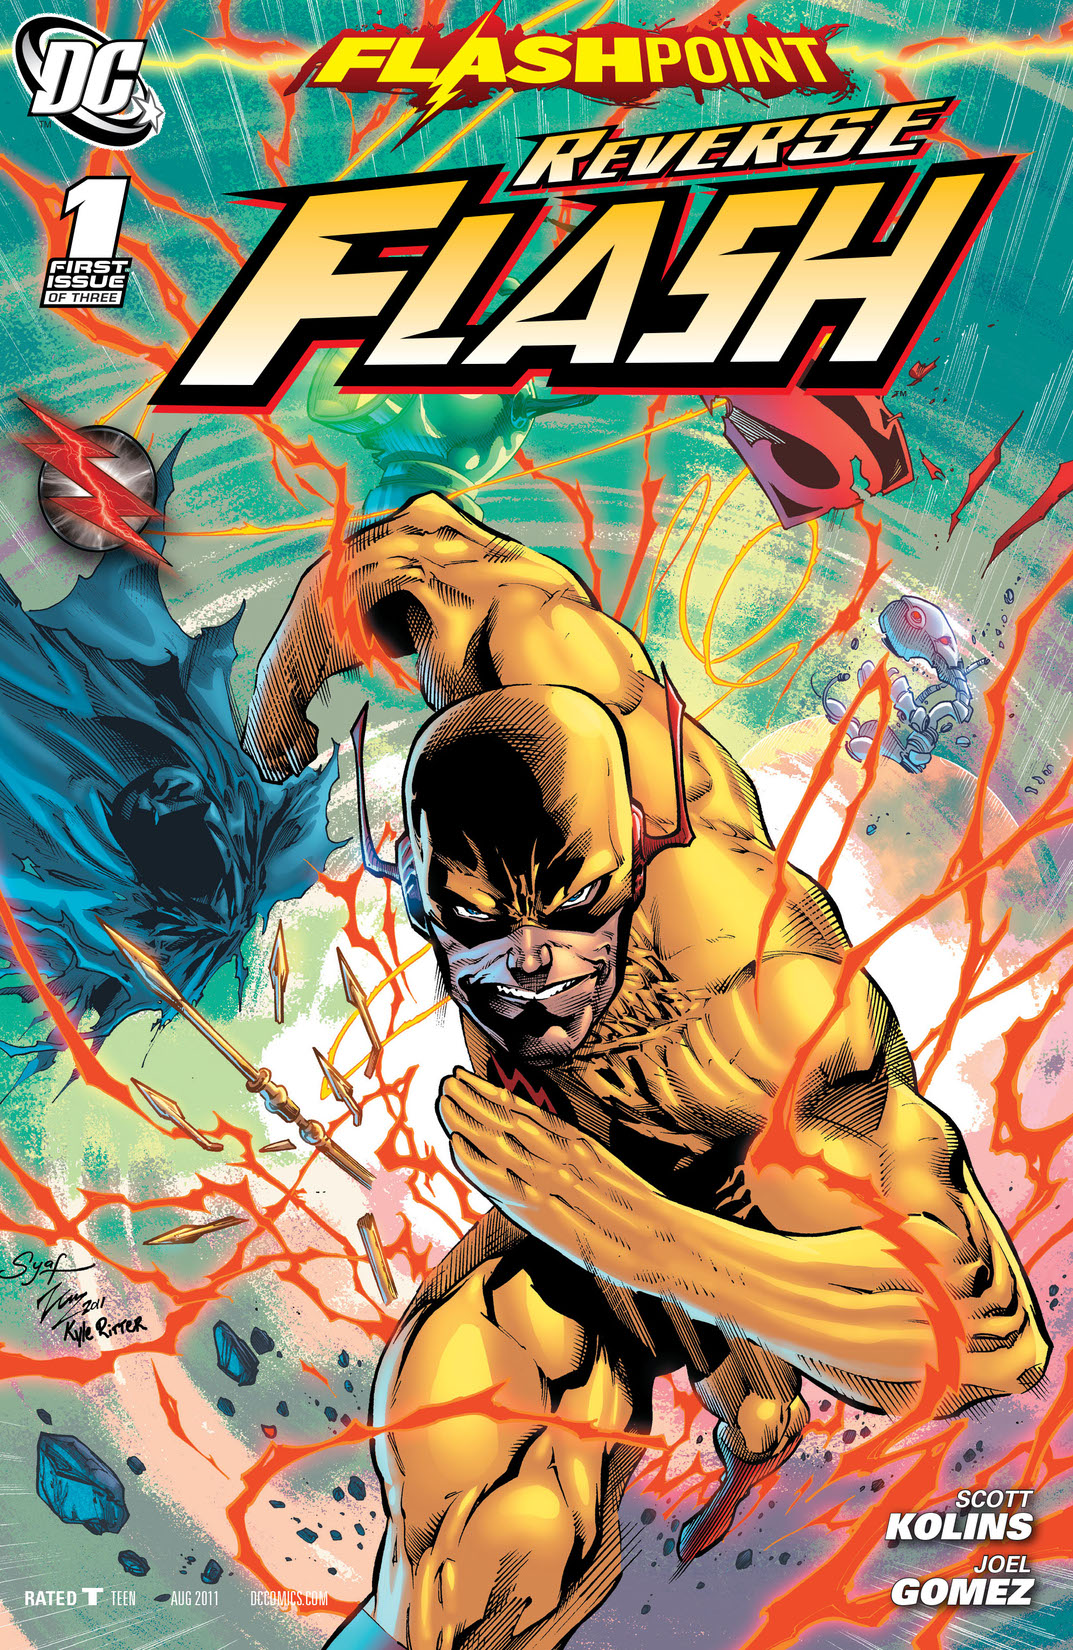 Flashpoint: Reverse-Flash #1 preview images